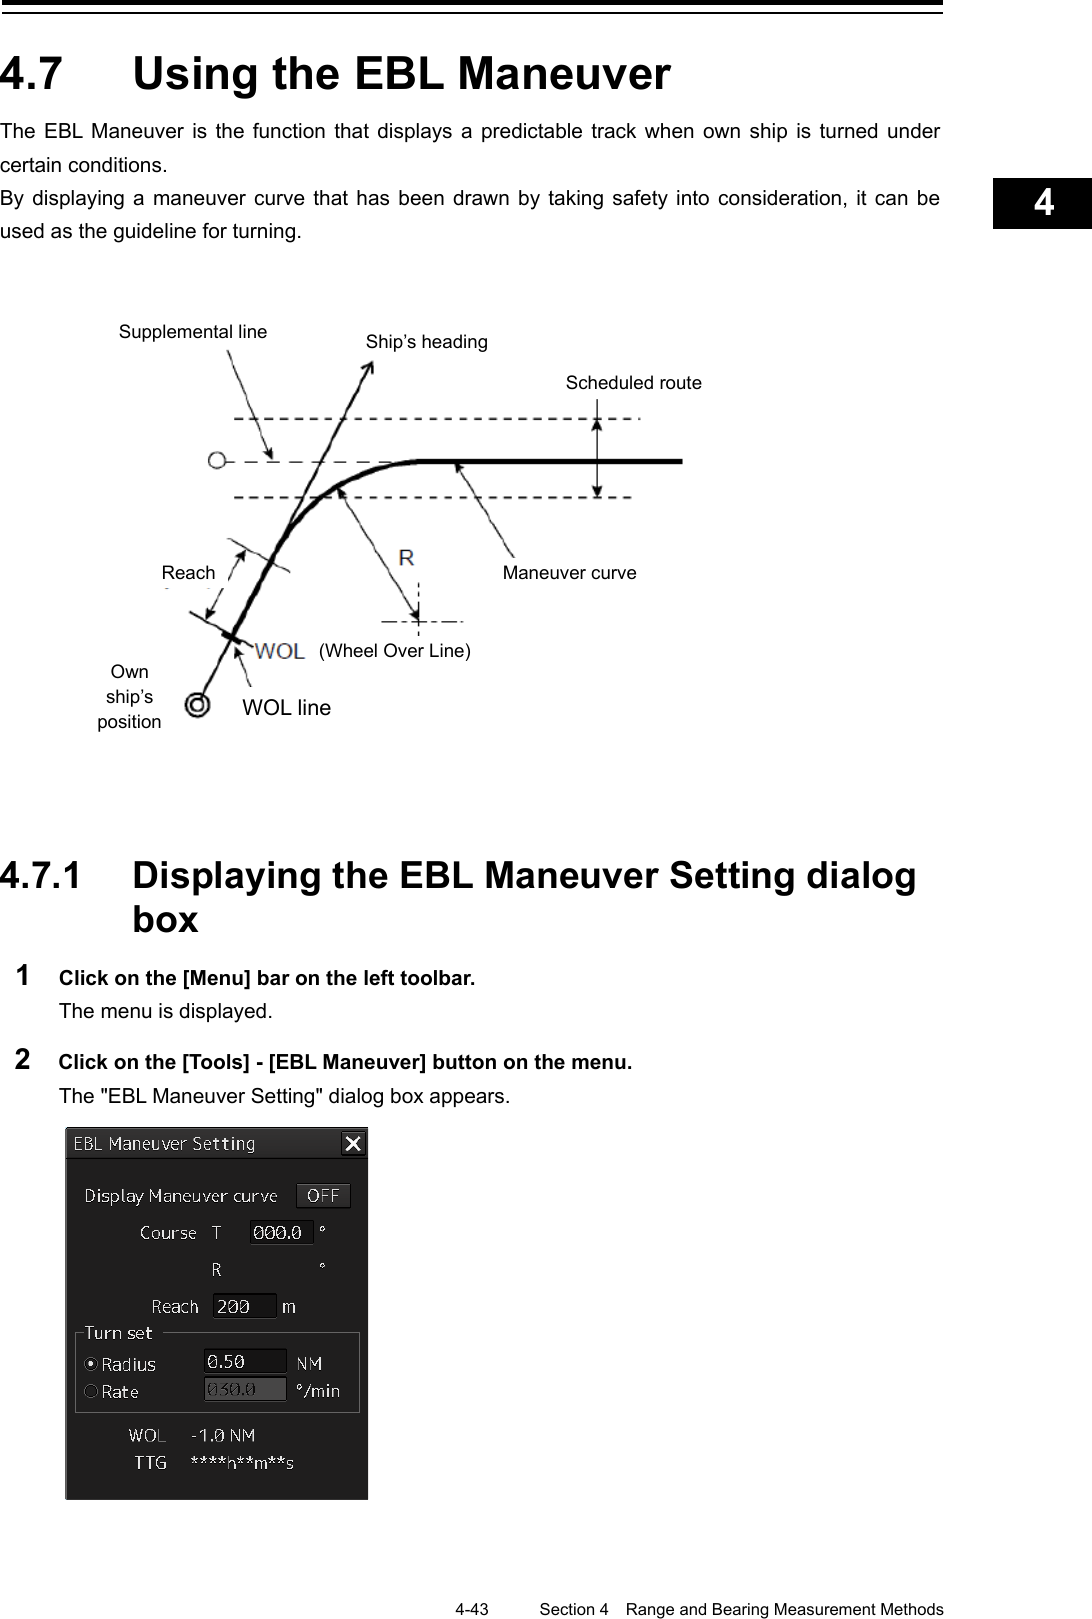    4-43  Section 4  Range and Bearing Measurement Methods    1  2  3  4  5  6  7  8  9  10  11  12  13  14  15  16  17  18  19  20  21  22  23  24  25  APP A   APP B  1    4.7  Using the EBL Maneuver The EBL Maneuver is the function that displays a predictable track when own ship is turned under certain conditions. By displaying a maneuver curve that has been drawn by taking safety into consideration, it can be used as the guideline for turning.                  4.7.1 Displaying the EBL Maneuver Setting dialog box 1  Click on the [Menu] bar on the left toolbar. The menu is displayed. 2  Click on the [Tools] - [EBL Maneuver] button on the menu. The &quot;EBL Maneuver Setting&quot; dialog box appears.     Supplemental line Ship’s heading Scheduled route Own ship’s position Reach Maneuver curve (Wheel Over Line) WOL line 